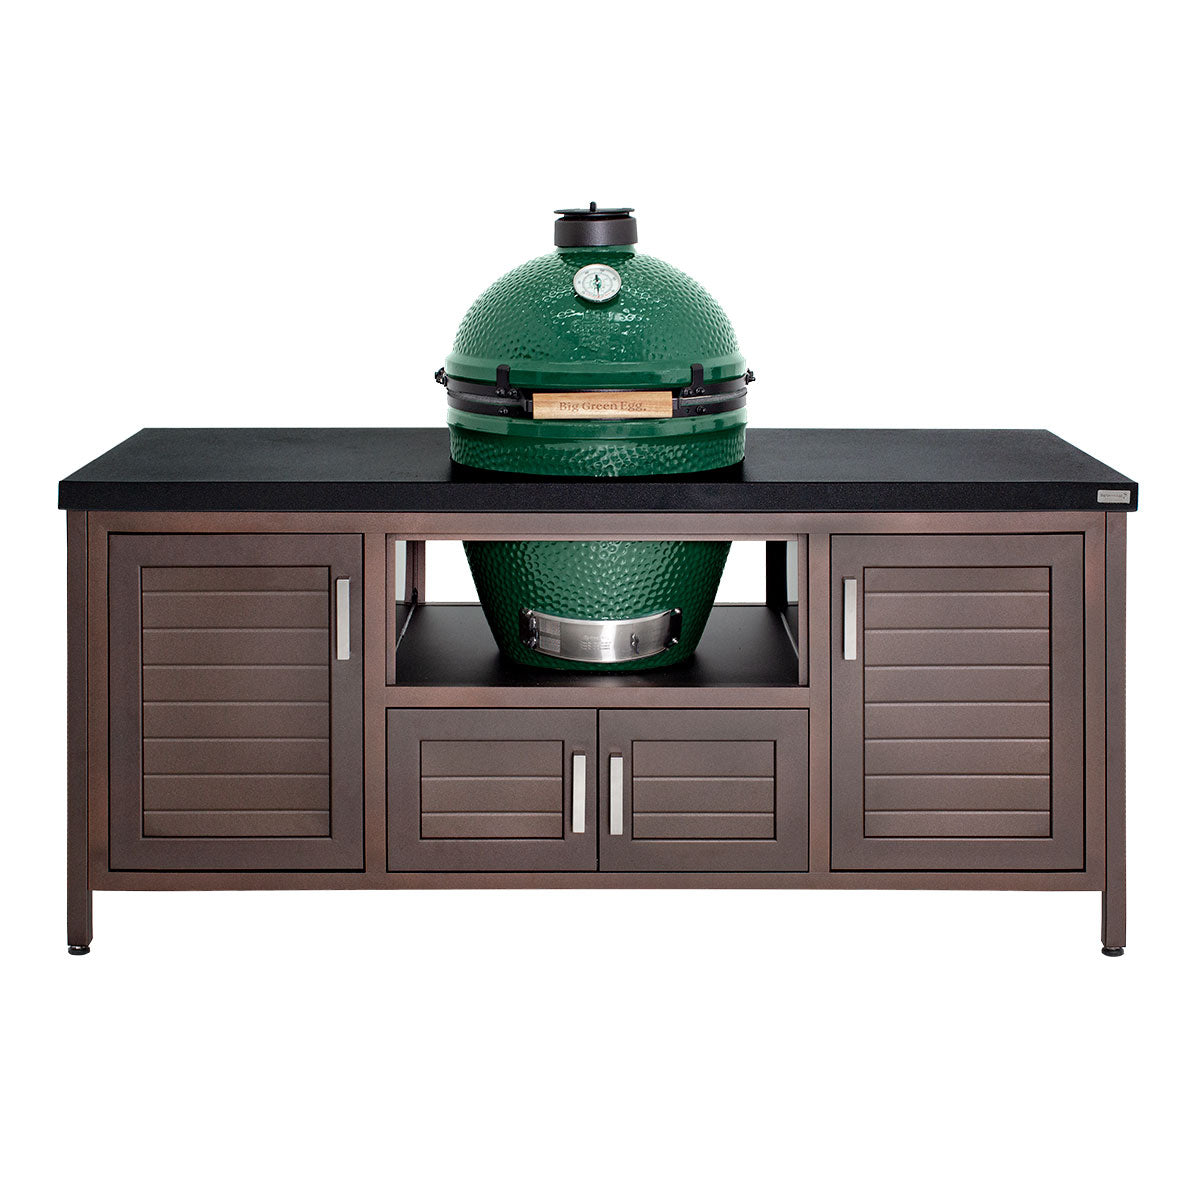 Modern Farmhouse-Style Table (72 inch) for Large Big Green Egg